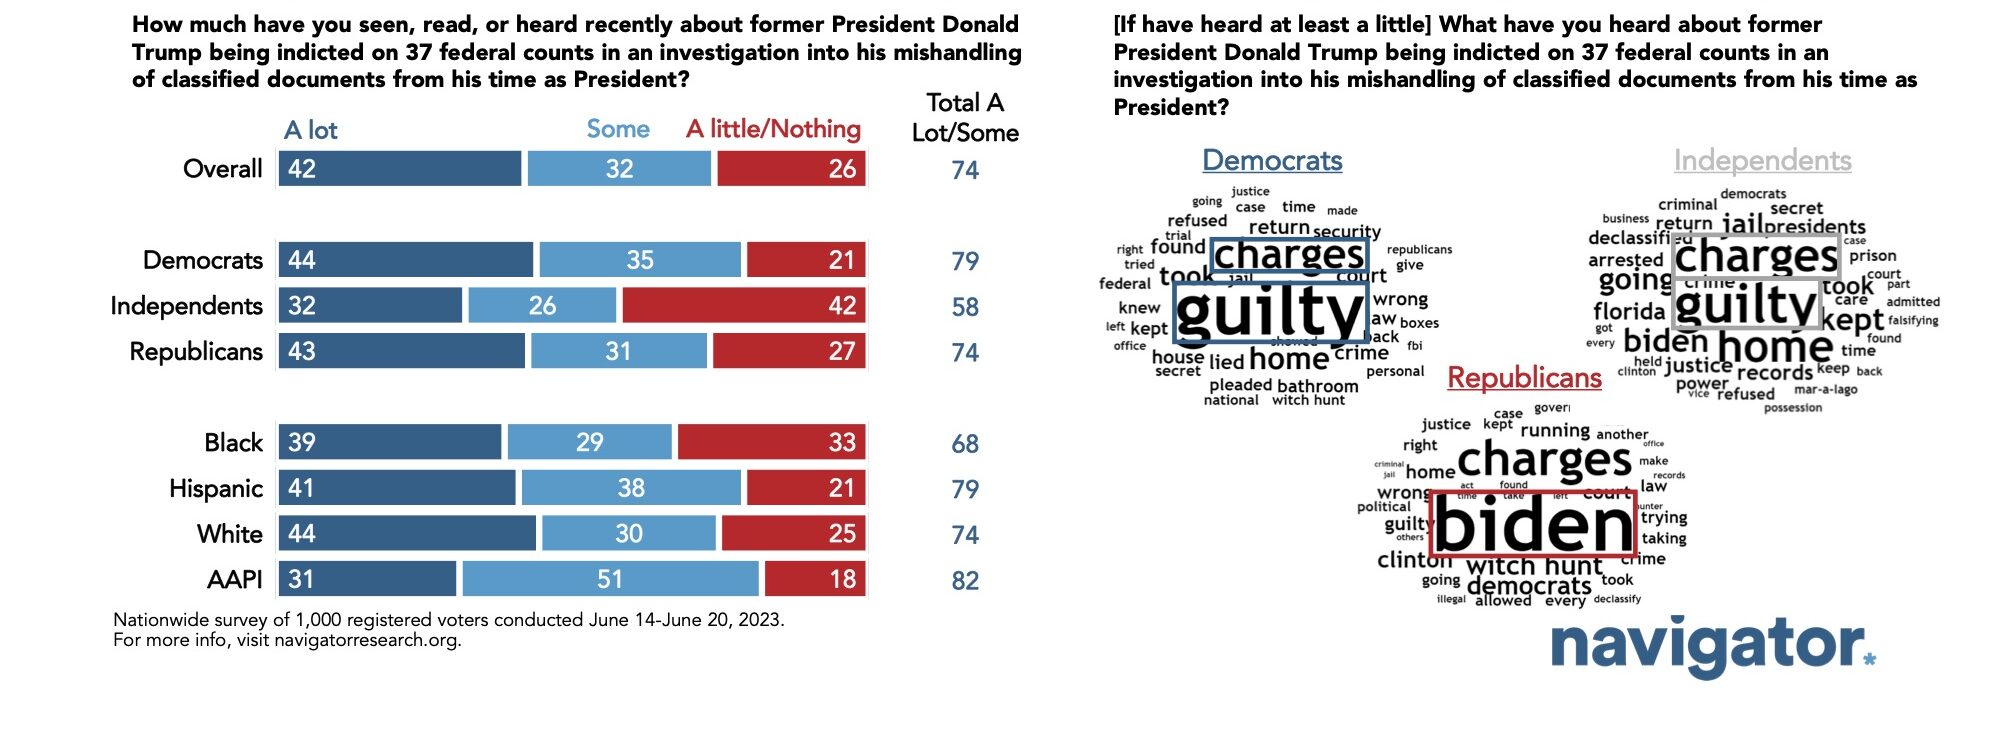 Bar graphs showing survey results to the following questions after Donald Trump's indictment: How much have you seen, read, or heard recently about former President Donald Trump being indicted on 37 federal counts in an investigation into his mishandling of classified documents from his time as President? [If have heard at least a little] What have you heard about former President Donald Trump being indicted on 37 federal counts in an investigation into his mishandling of classified documents from his time as President?